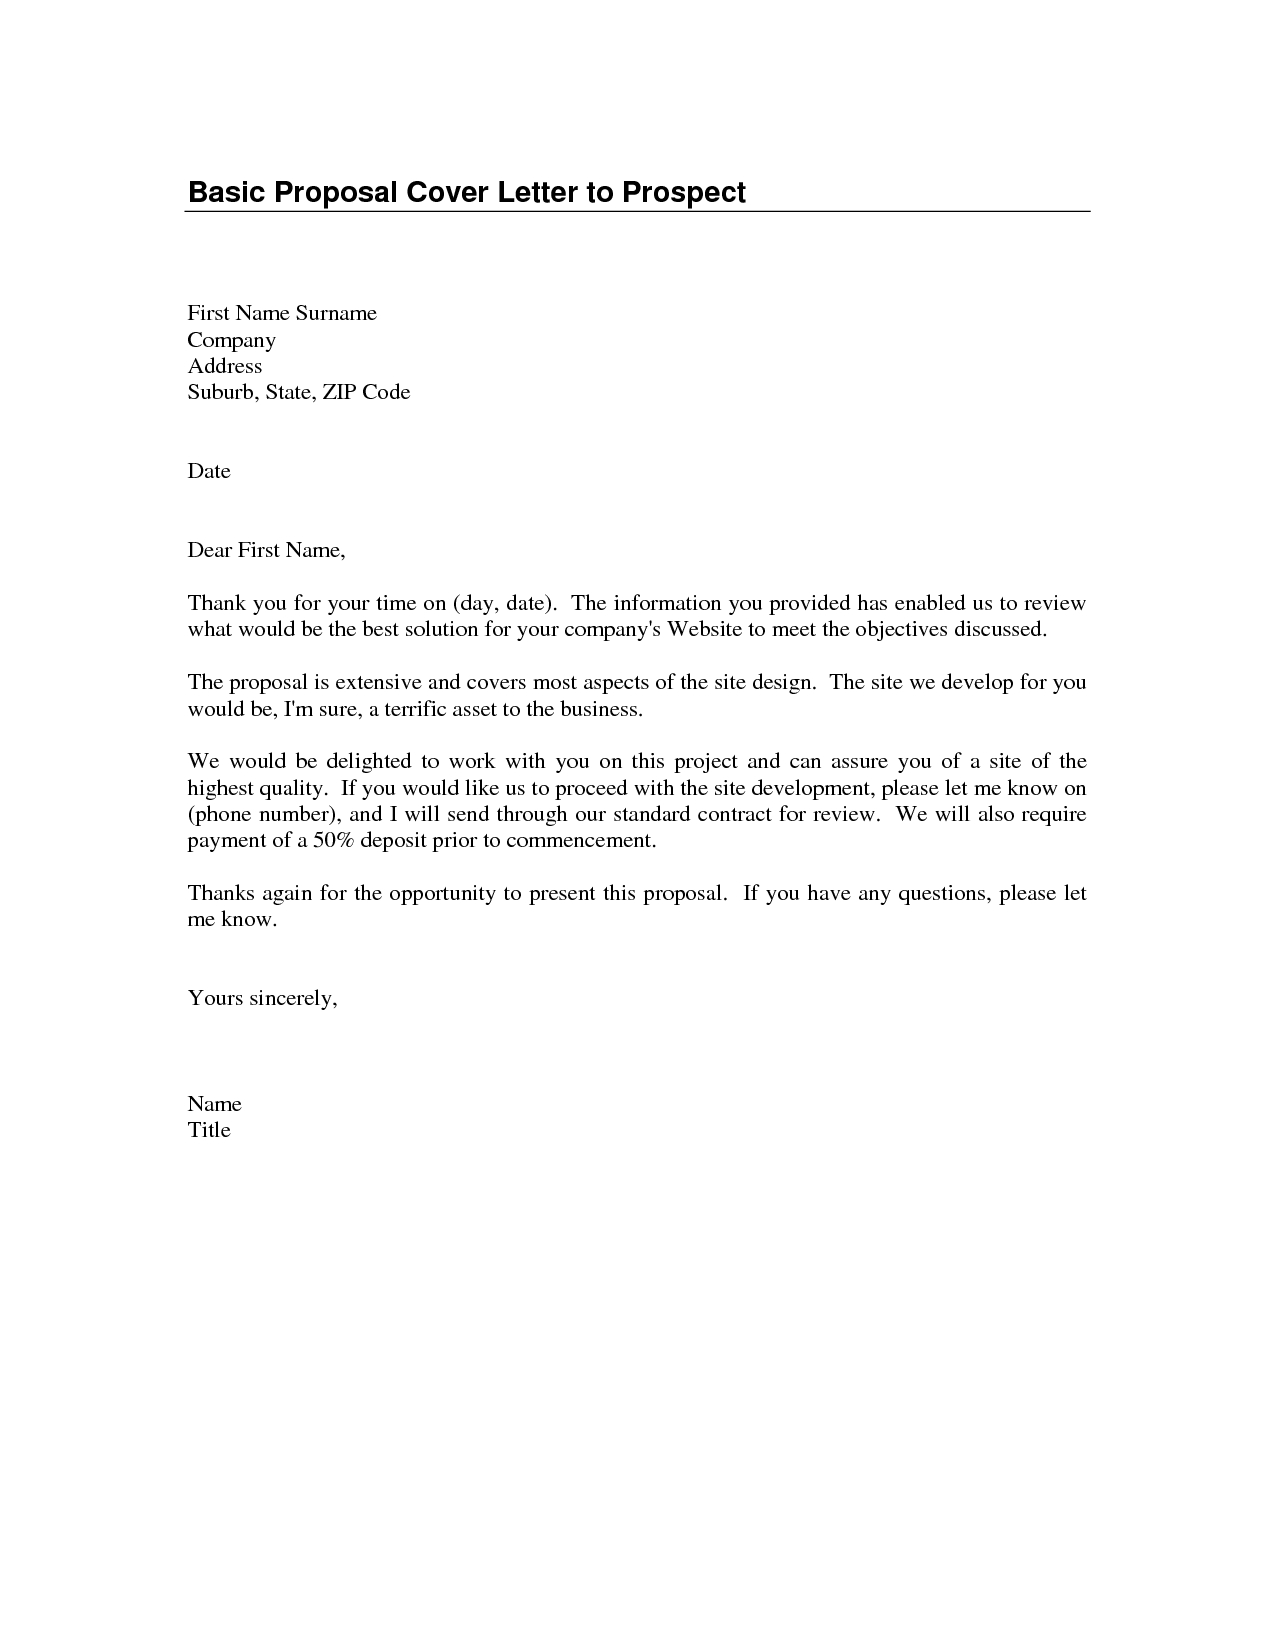 Basic Cover Letter Sample Basic Cover Letters Free within size 1275 X 1650